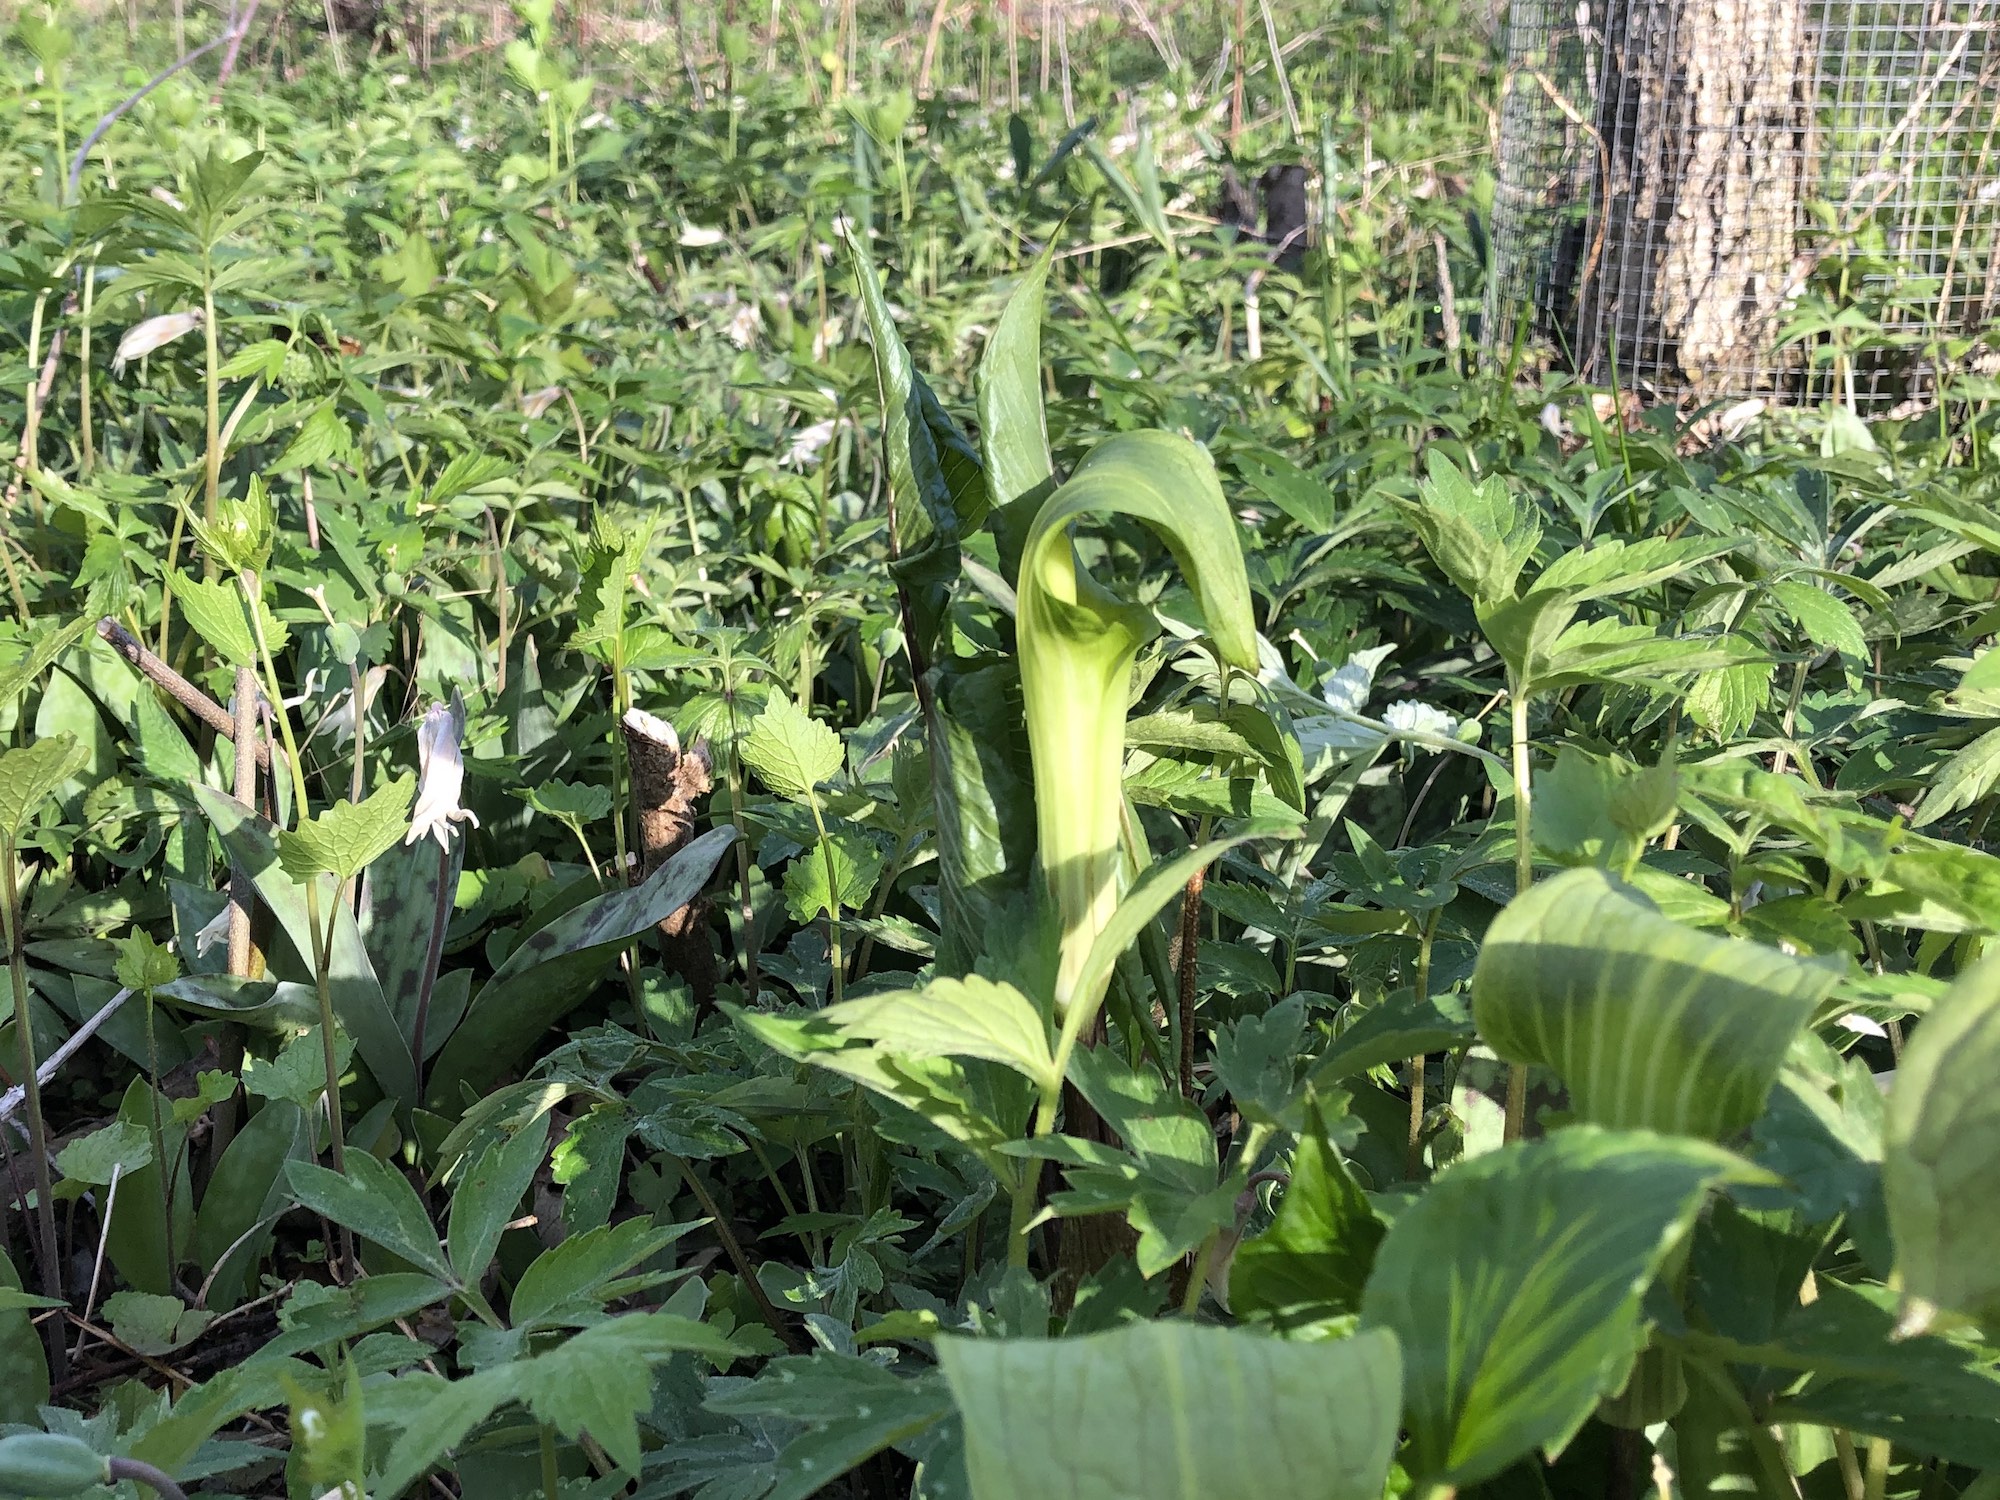 Jack-in-the-pulpit in Oak Savanna on May 4, 2020